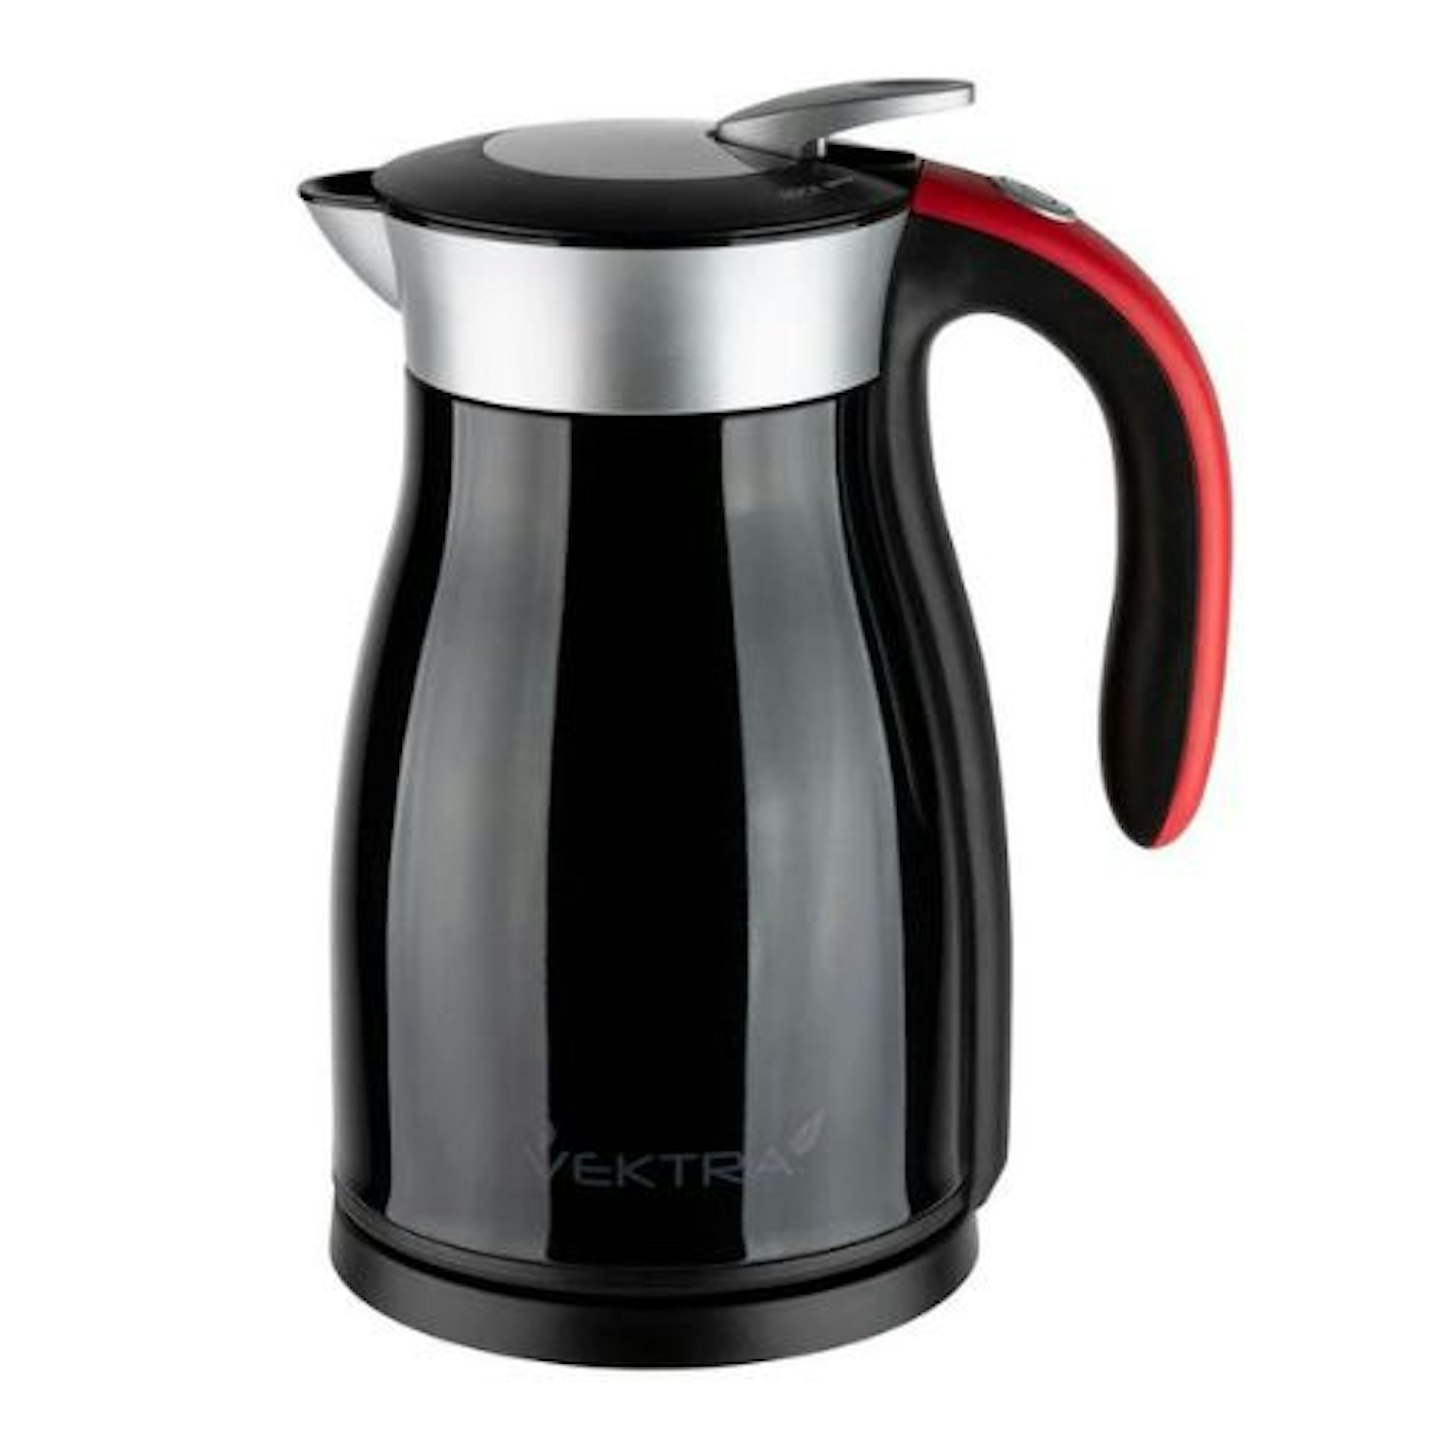 Vektra Vacuum Insulated Electric Kettle